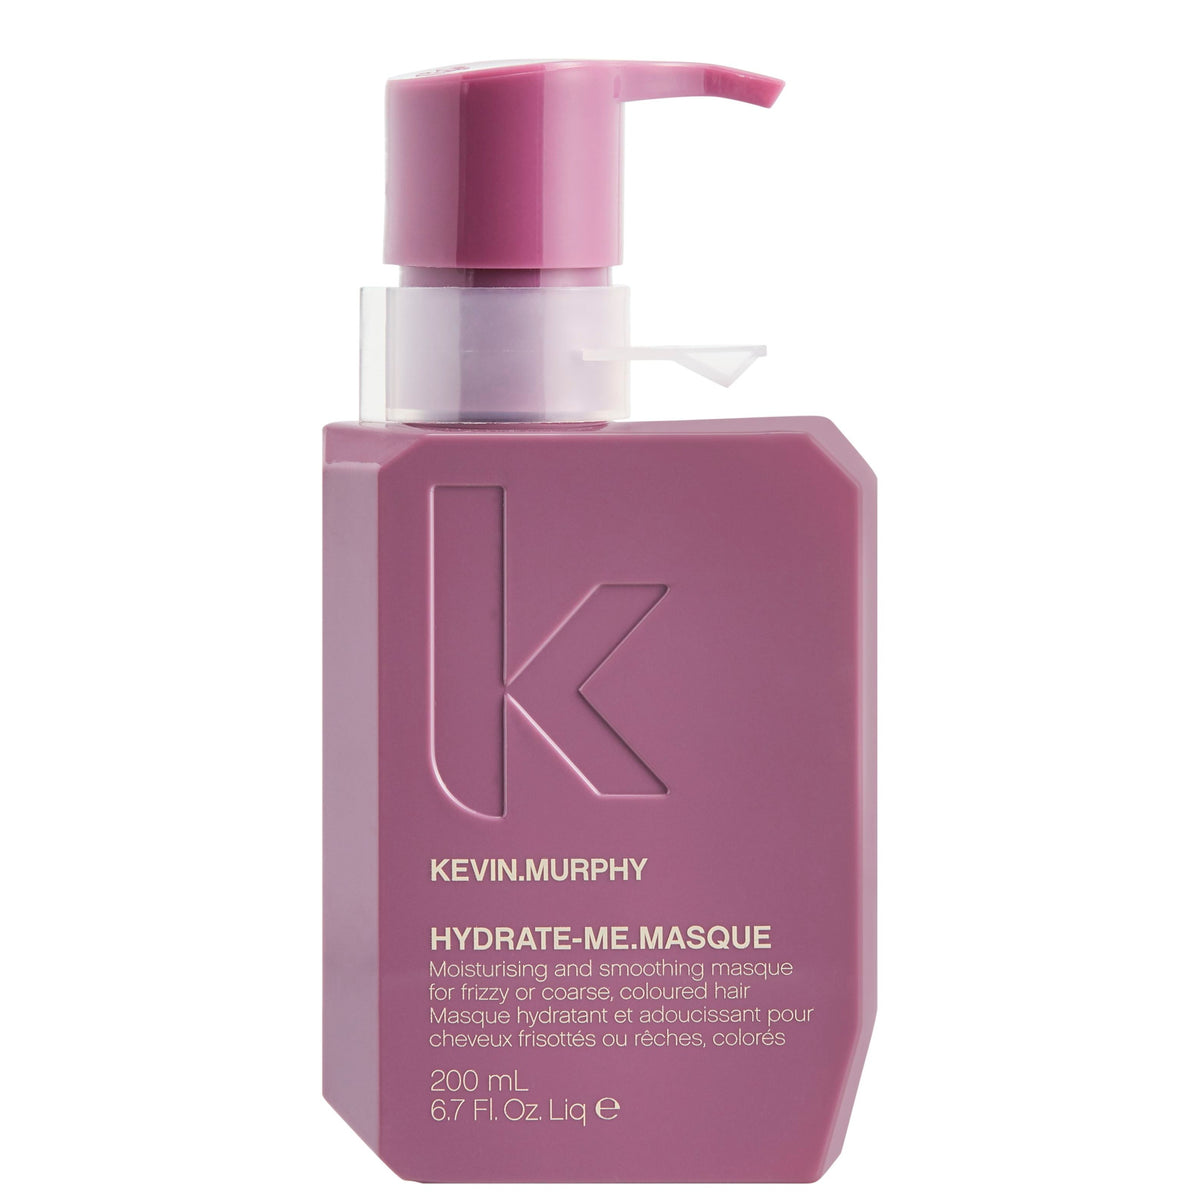 KEVIN.MURPHY HYDRATE.ME MASQUE at milk +